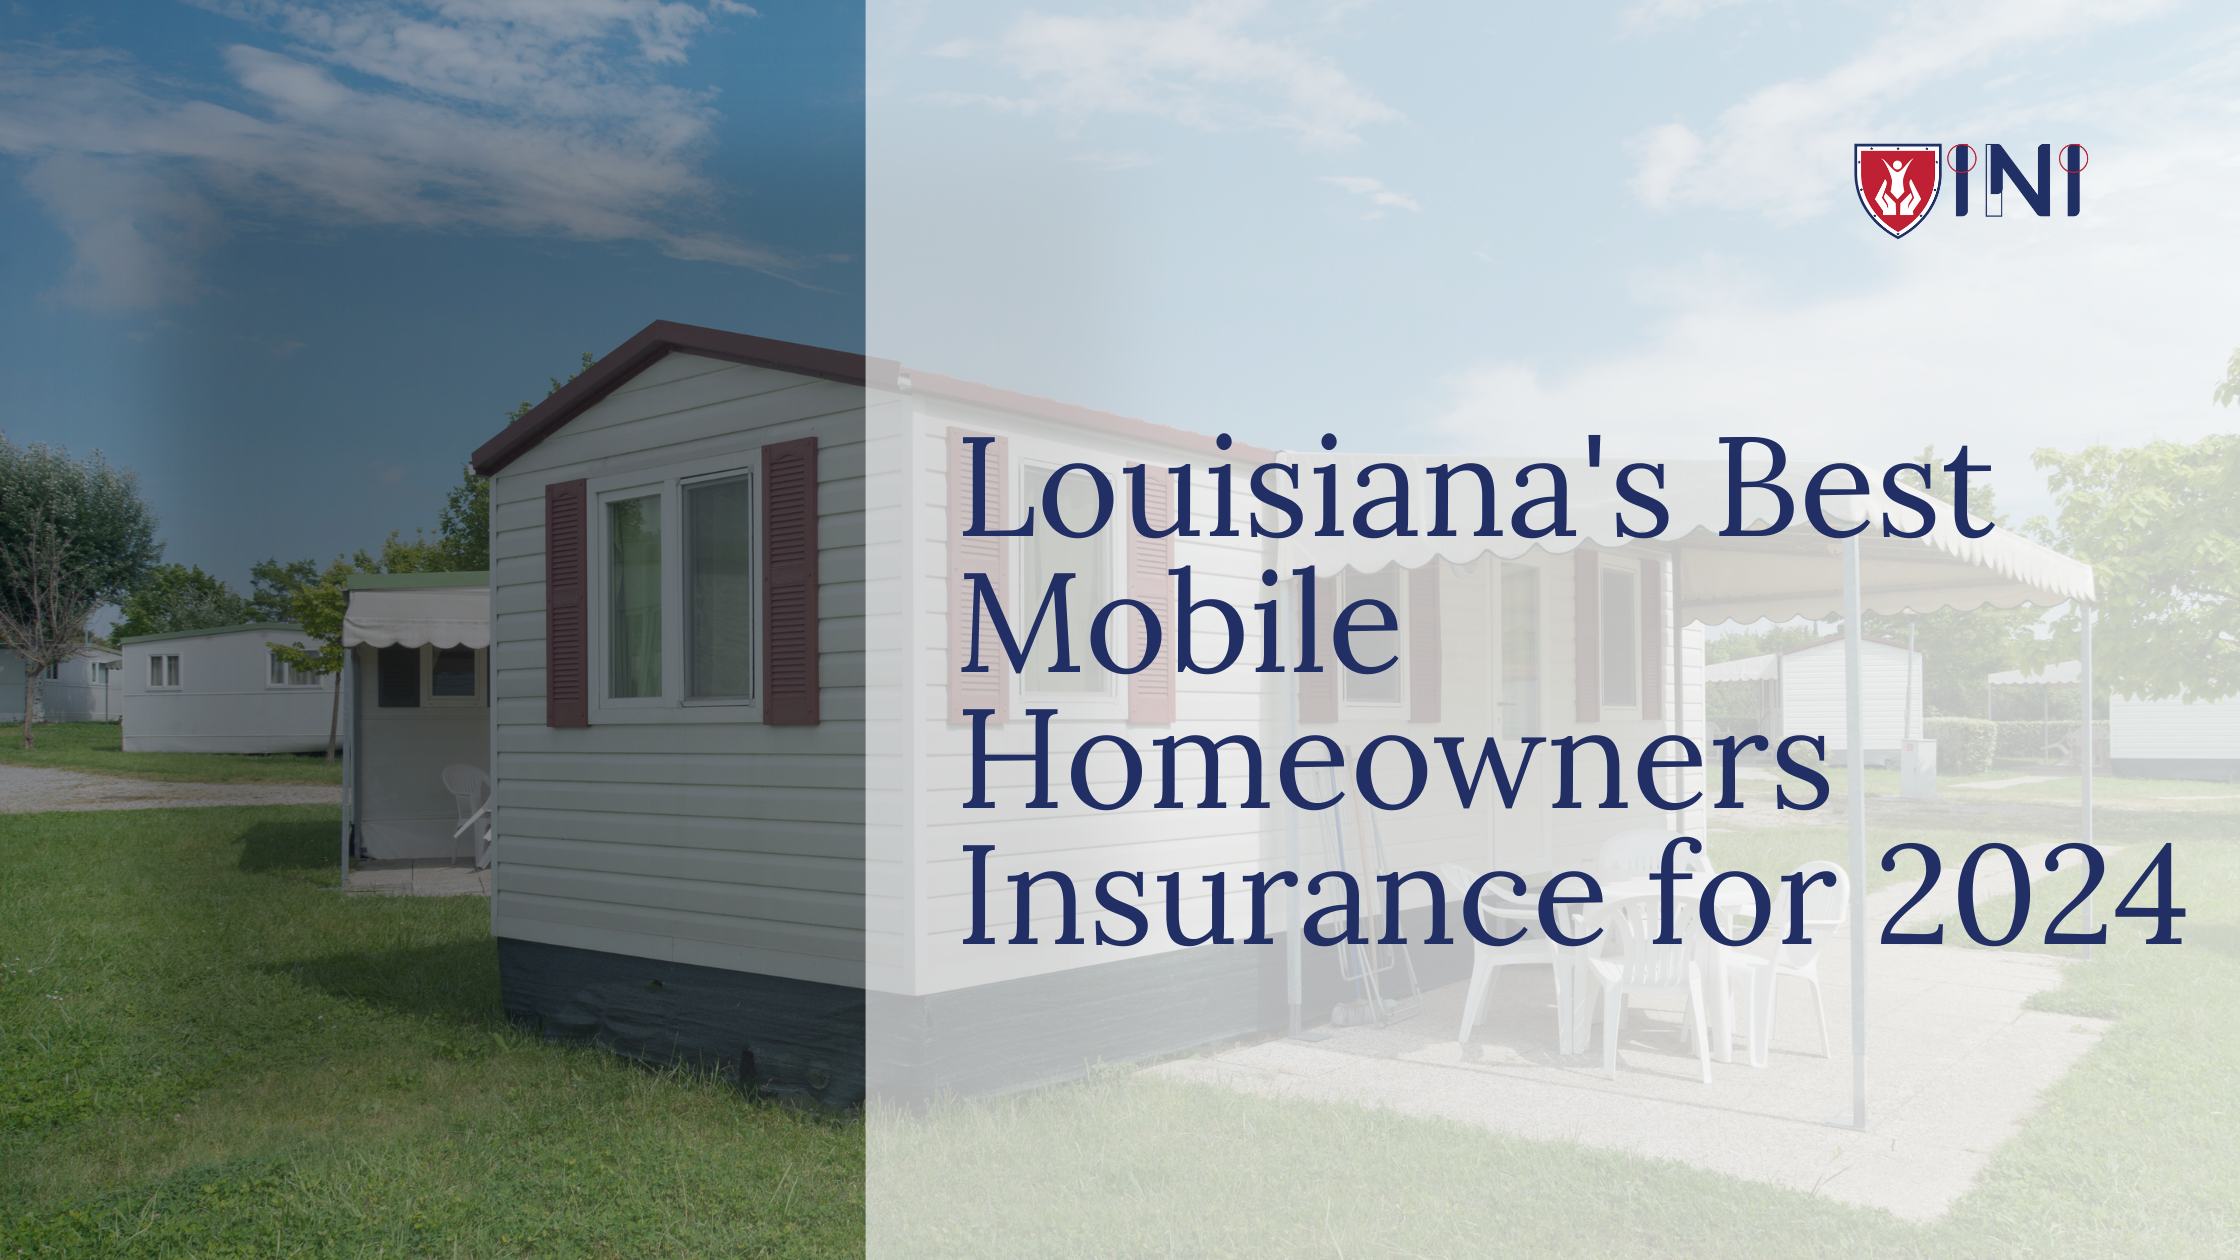 Louisiana's Best Mobile Homeowners Insurance for 2024